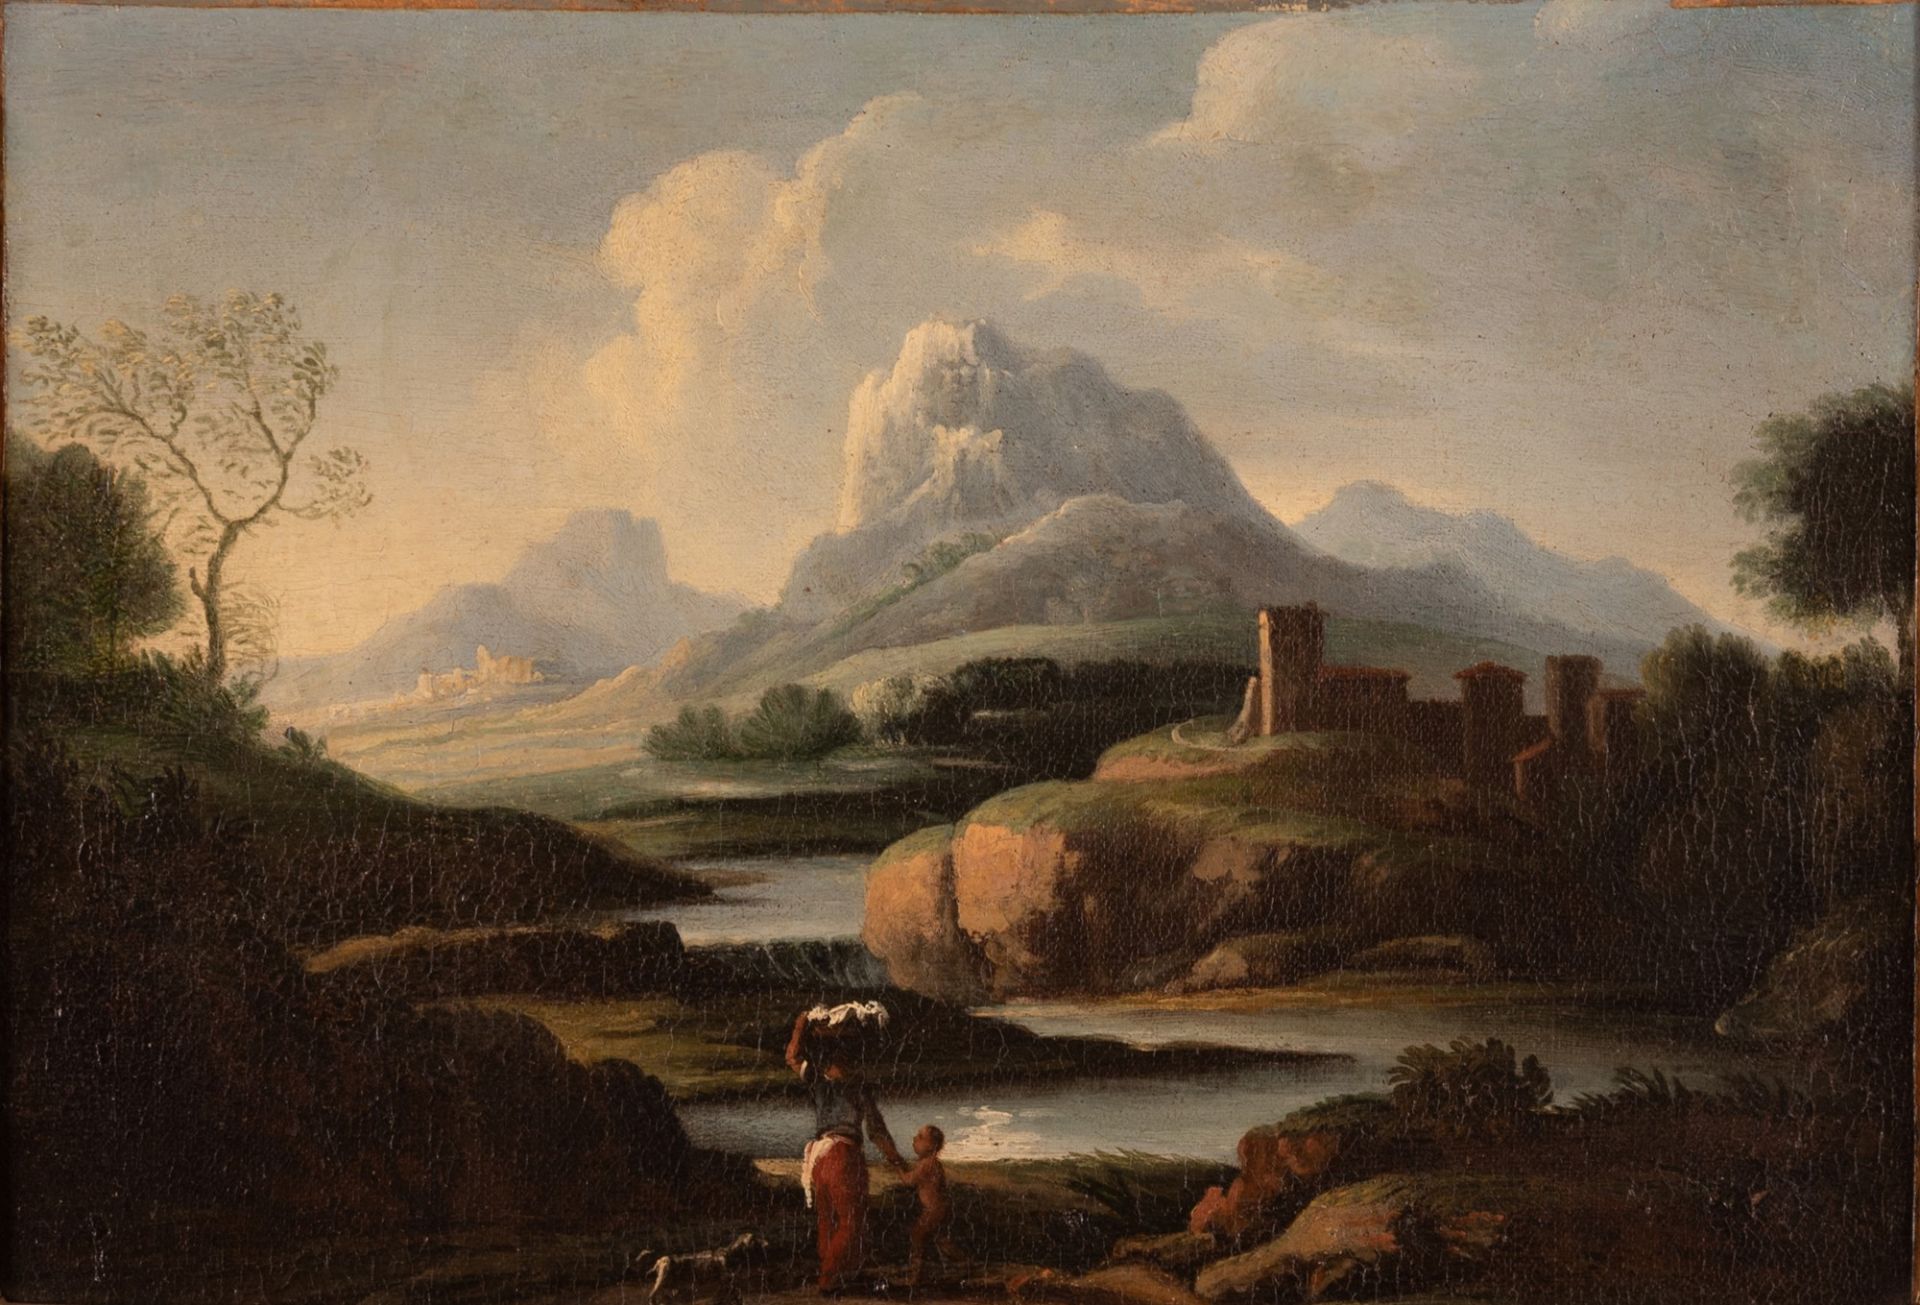  Landscape with Figures   17th century